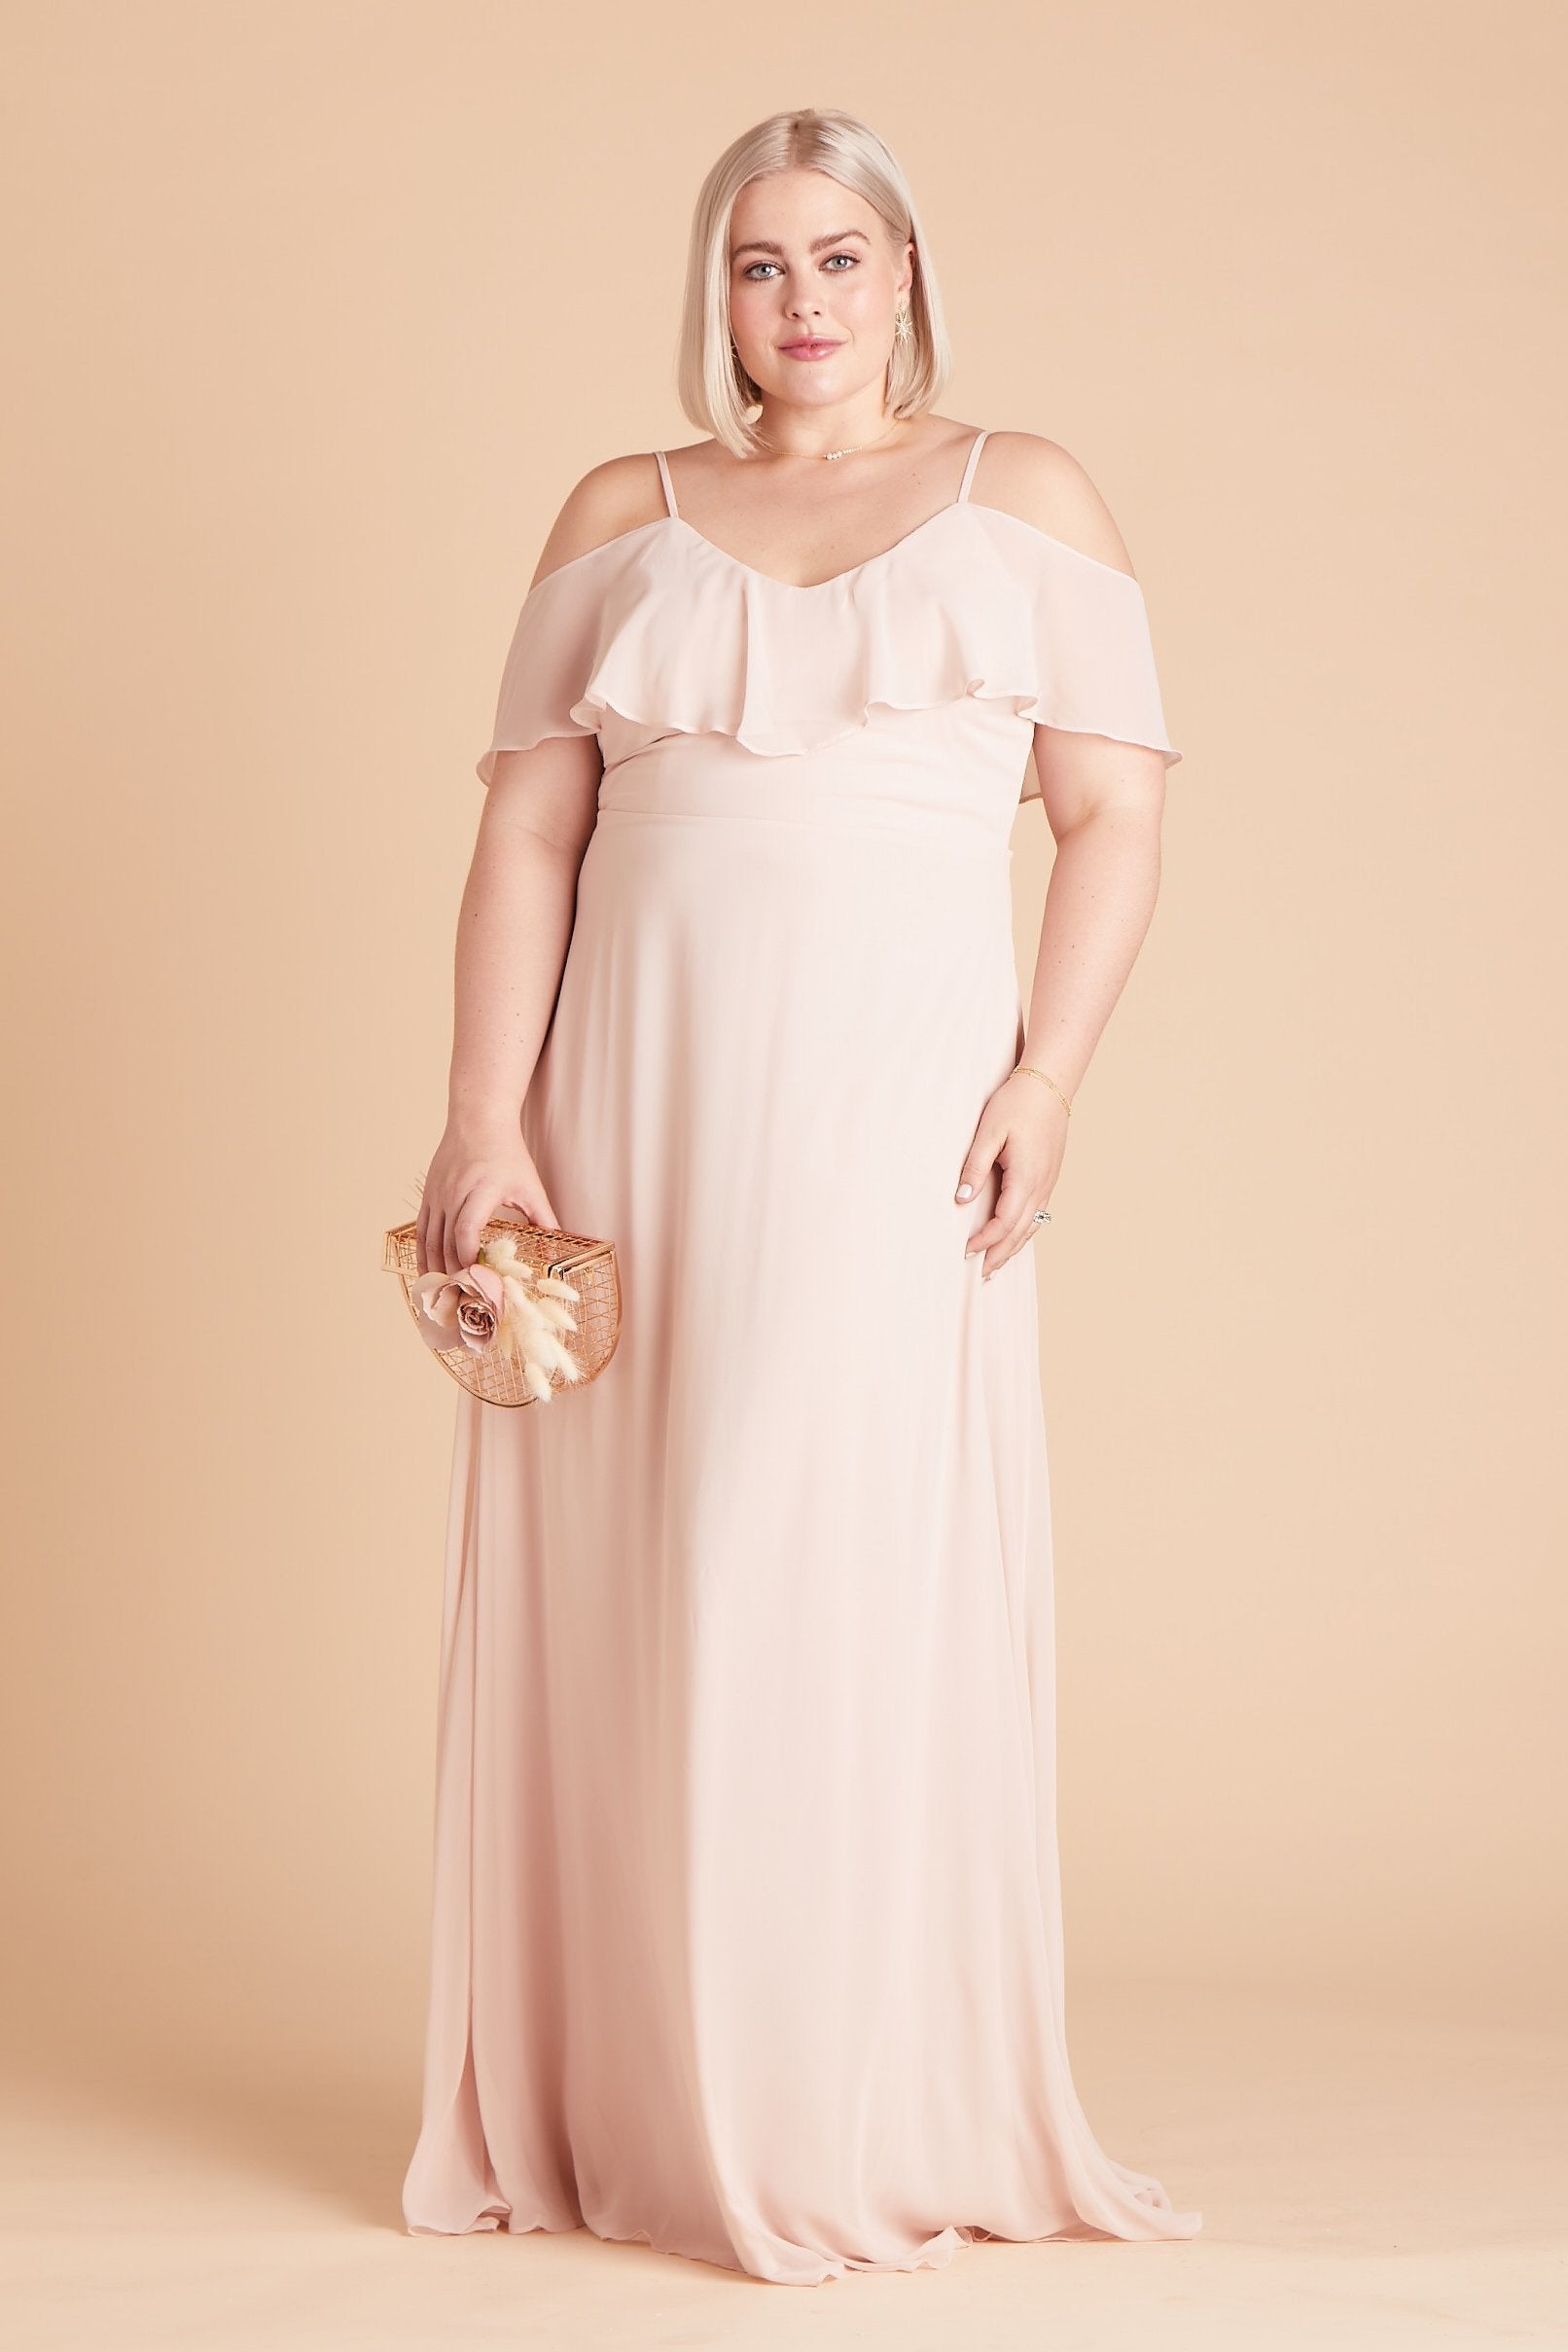 Jane convertible plus size bridesmaid dress in pale blush chiffon by Birdy Grey, front view